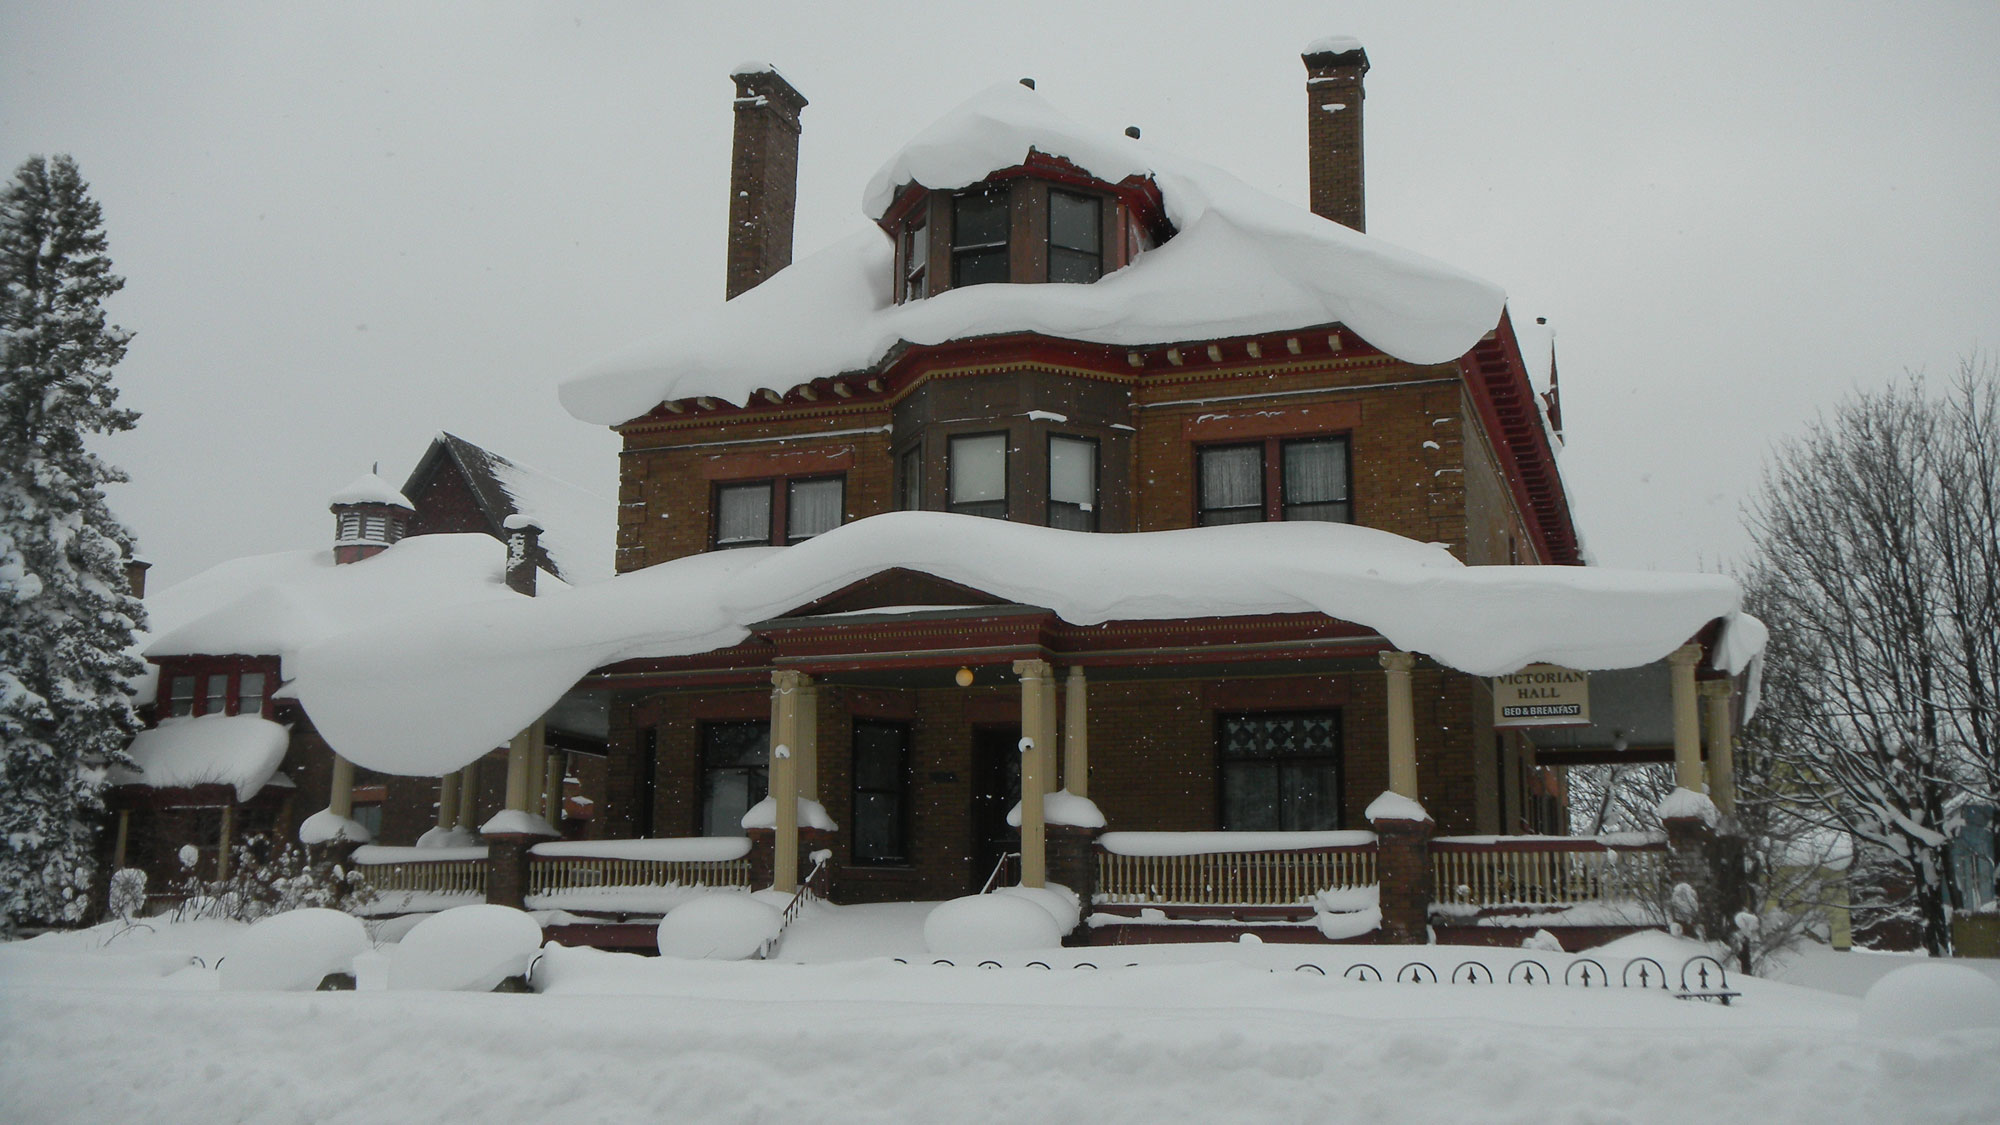 Photograph of Victorian Hall in Laurium, Michigan in the winter. The photo shows a large brick house. The roof of the house and the roof of its veranda are covered in a thick layer of snow. Snow also covers the ground around the house.